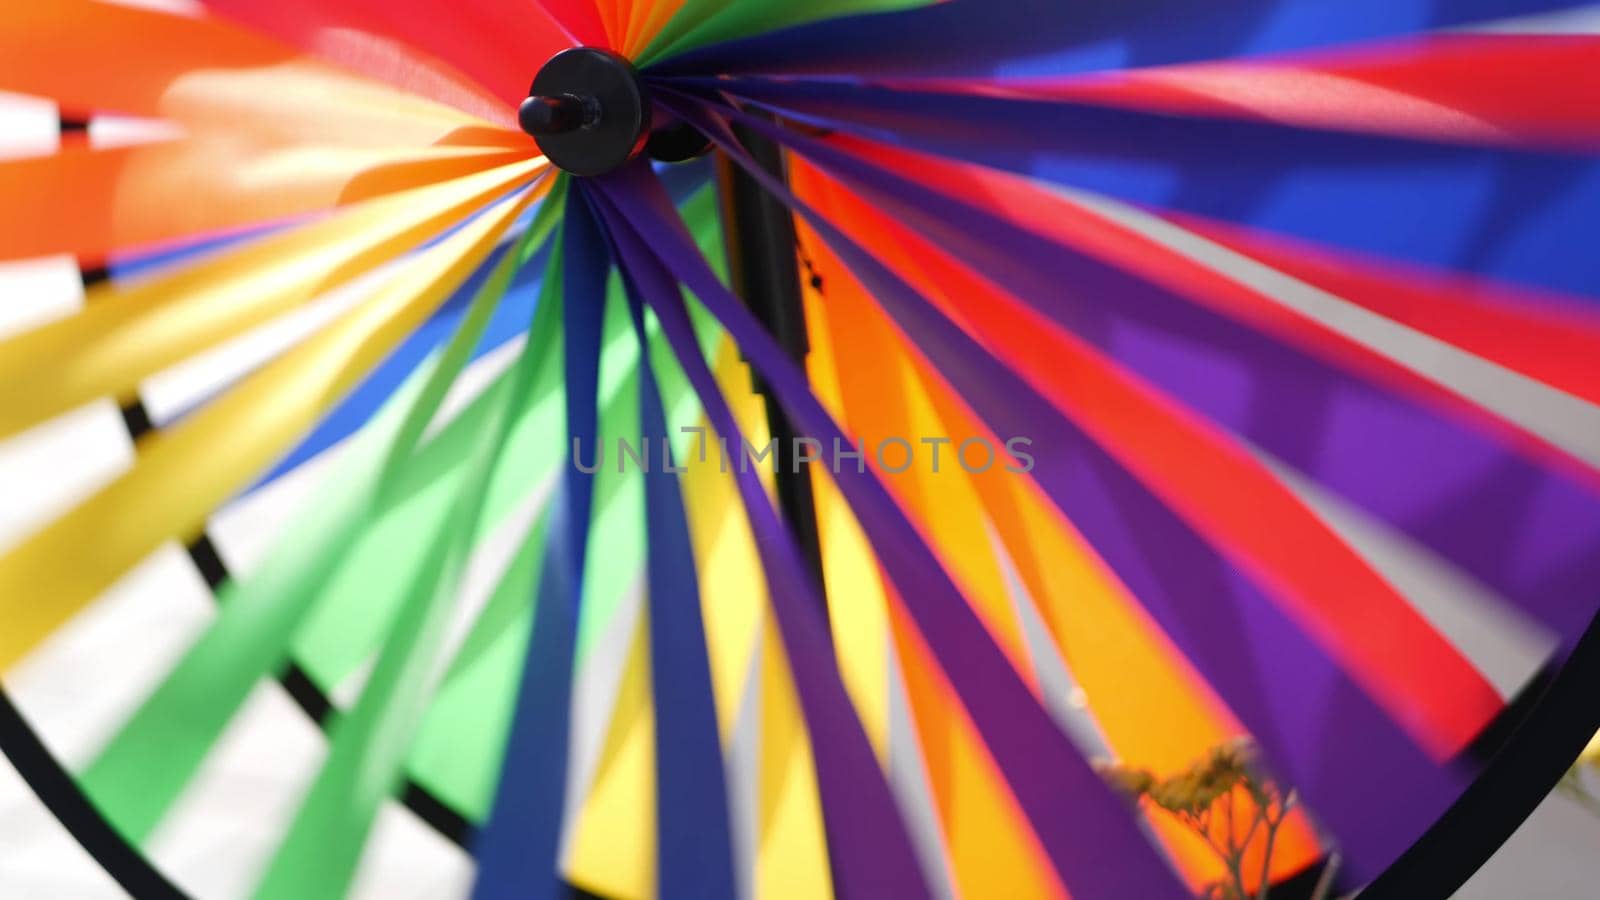 Colorful pinwheel spinning, weather wind vane, garden decoration in USA. Rainbow symbol of childhood, fantasy and imagination rotating. Multi colored spiral toy turning in breeze. Summertime dreaming by DogoraSun